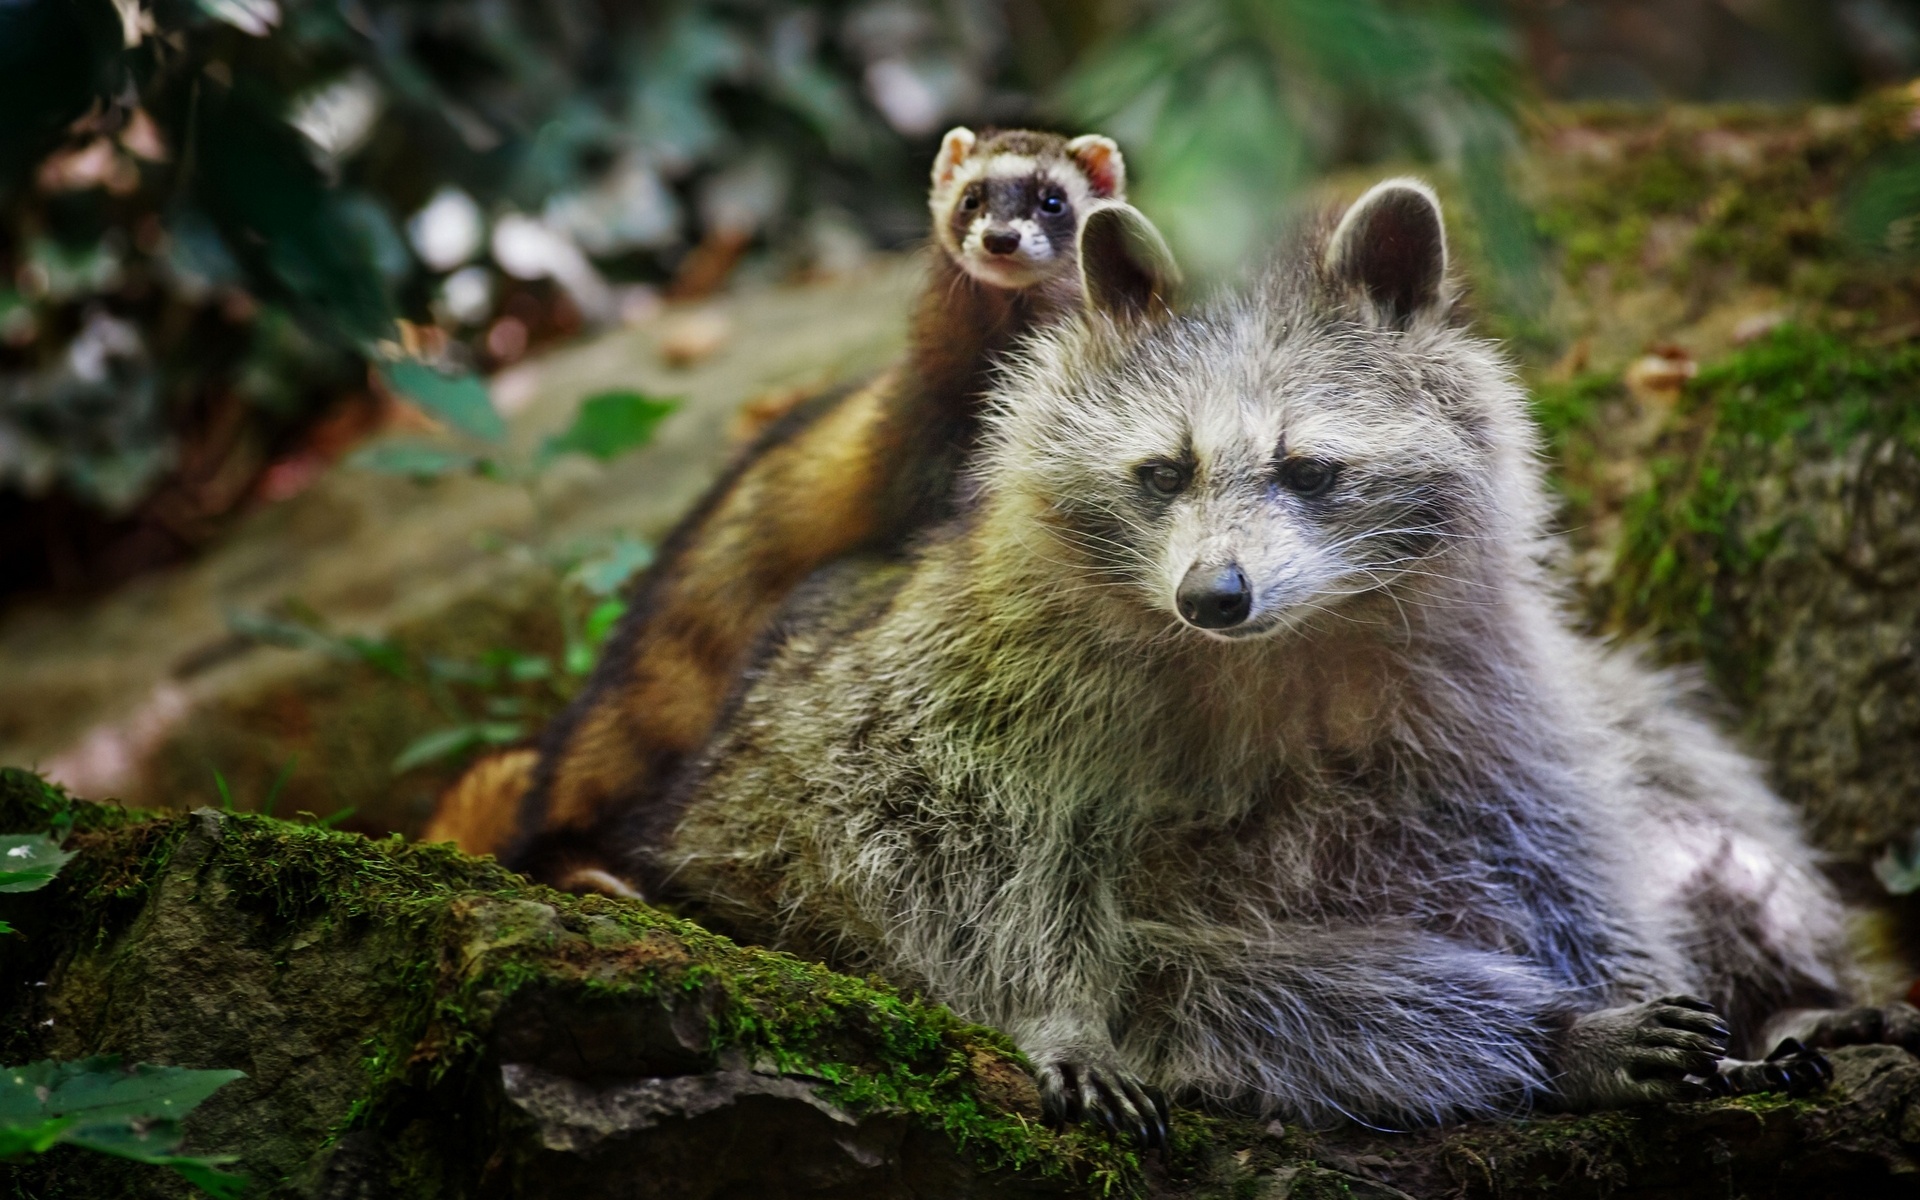 animals, Raccoons, Weasels, Friends, Wildlife, Fur, Whiskers, Nature, Forest, Rocks, Moss Wallpaper